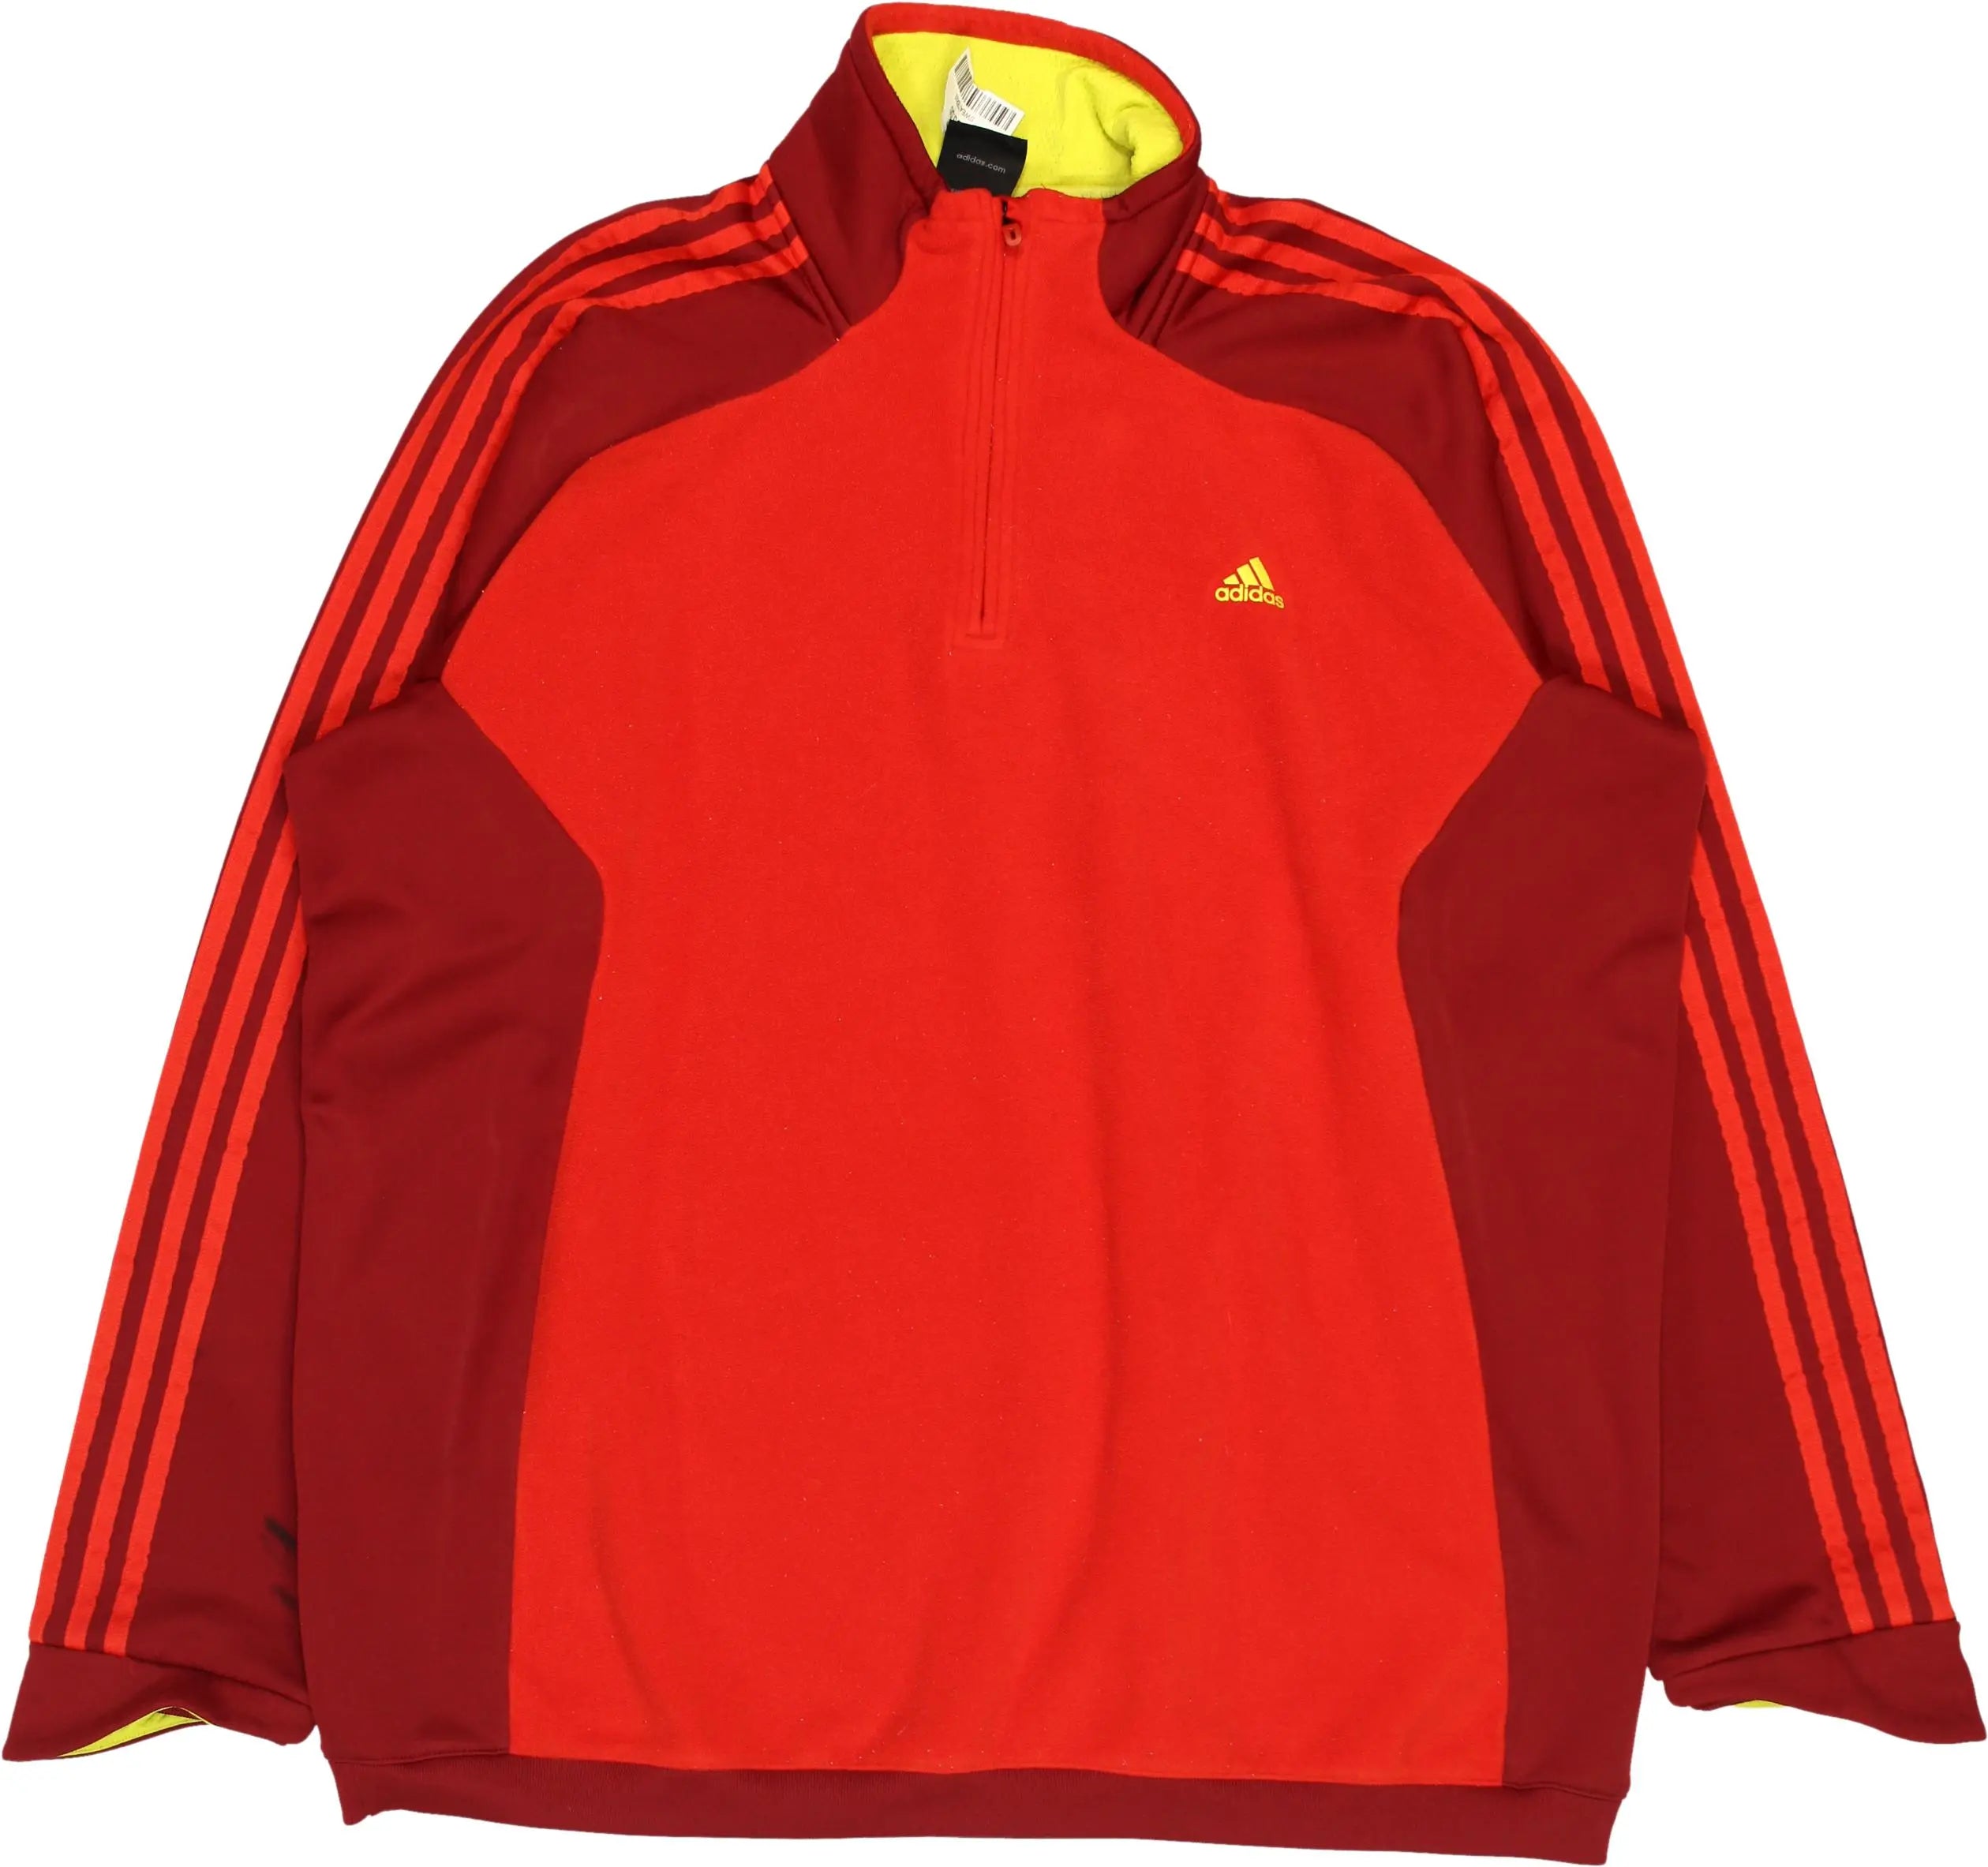 Adidas - Red Adidas zip-up sweater- ThriftTale.com - Vintage and second handclothing